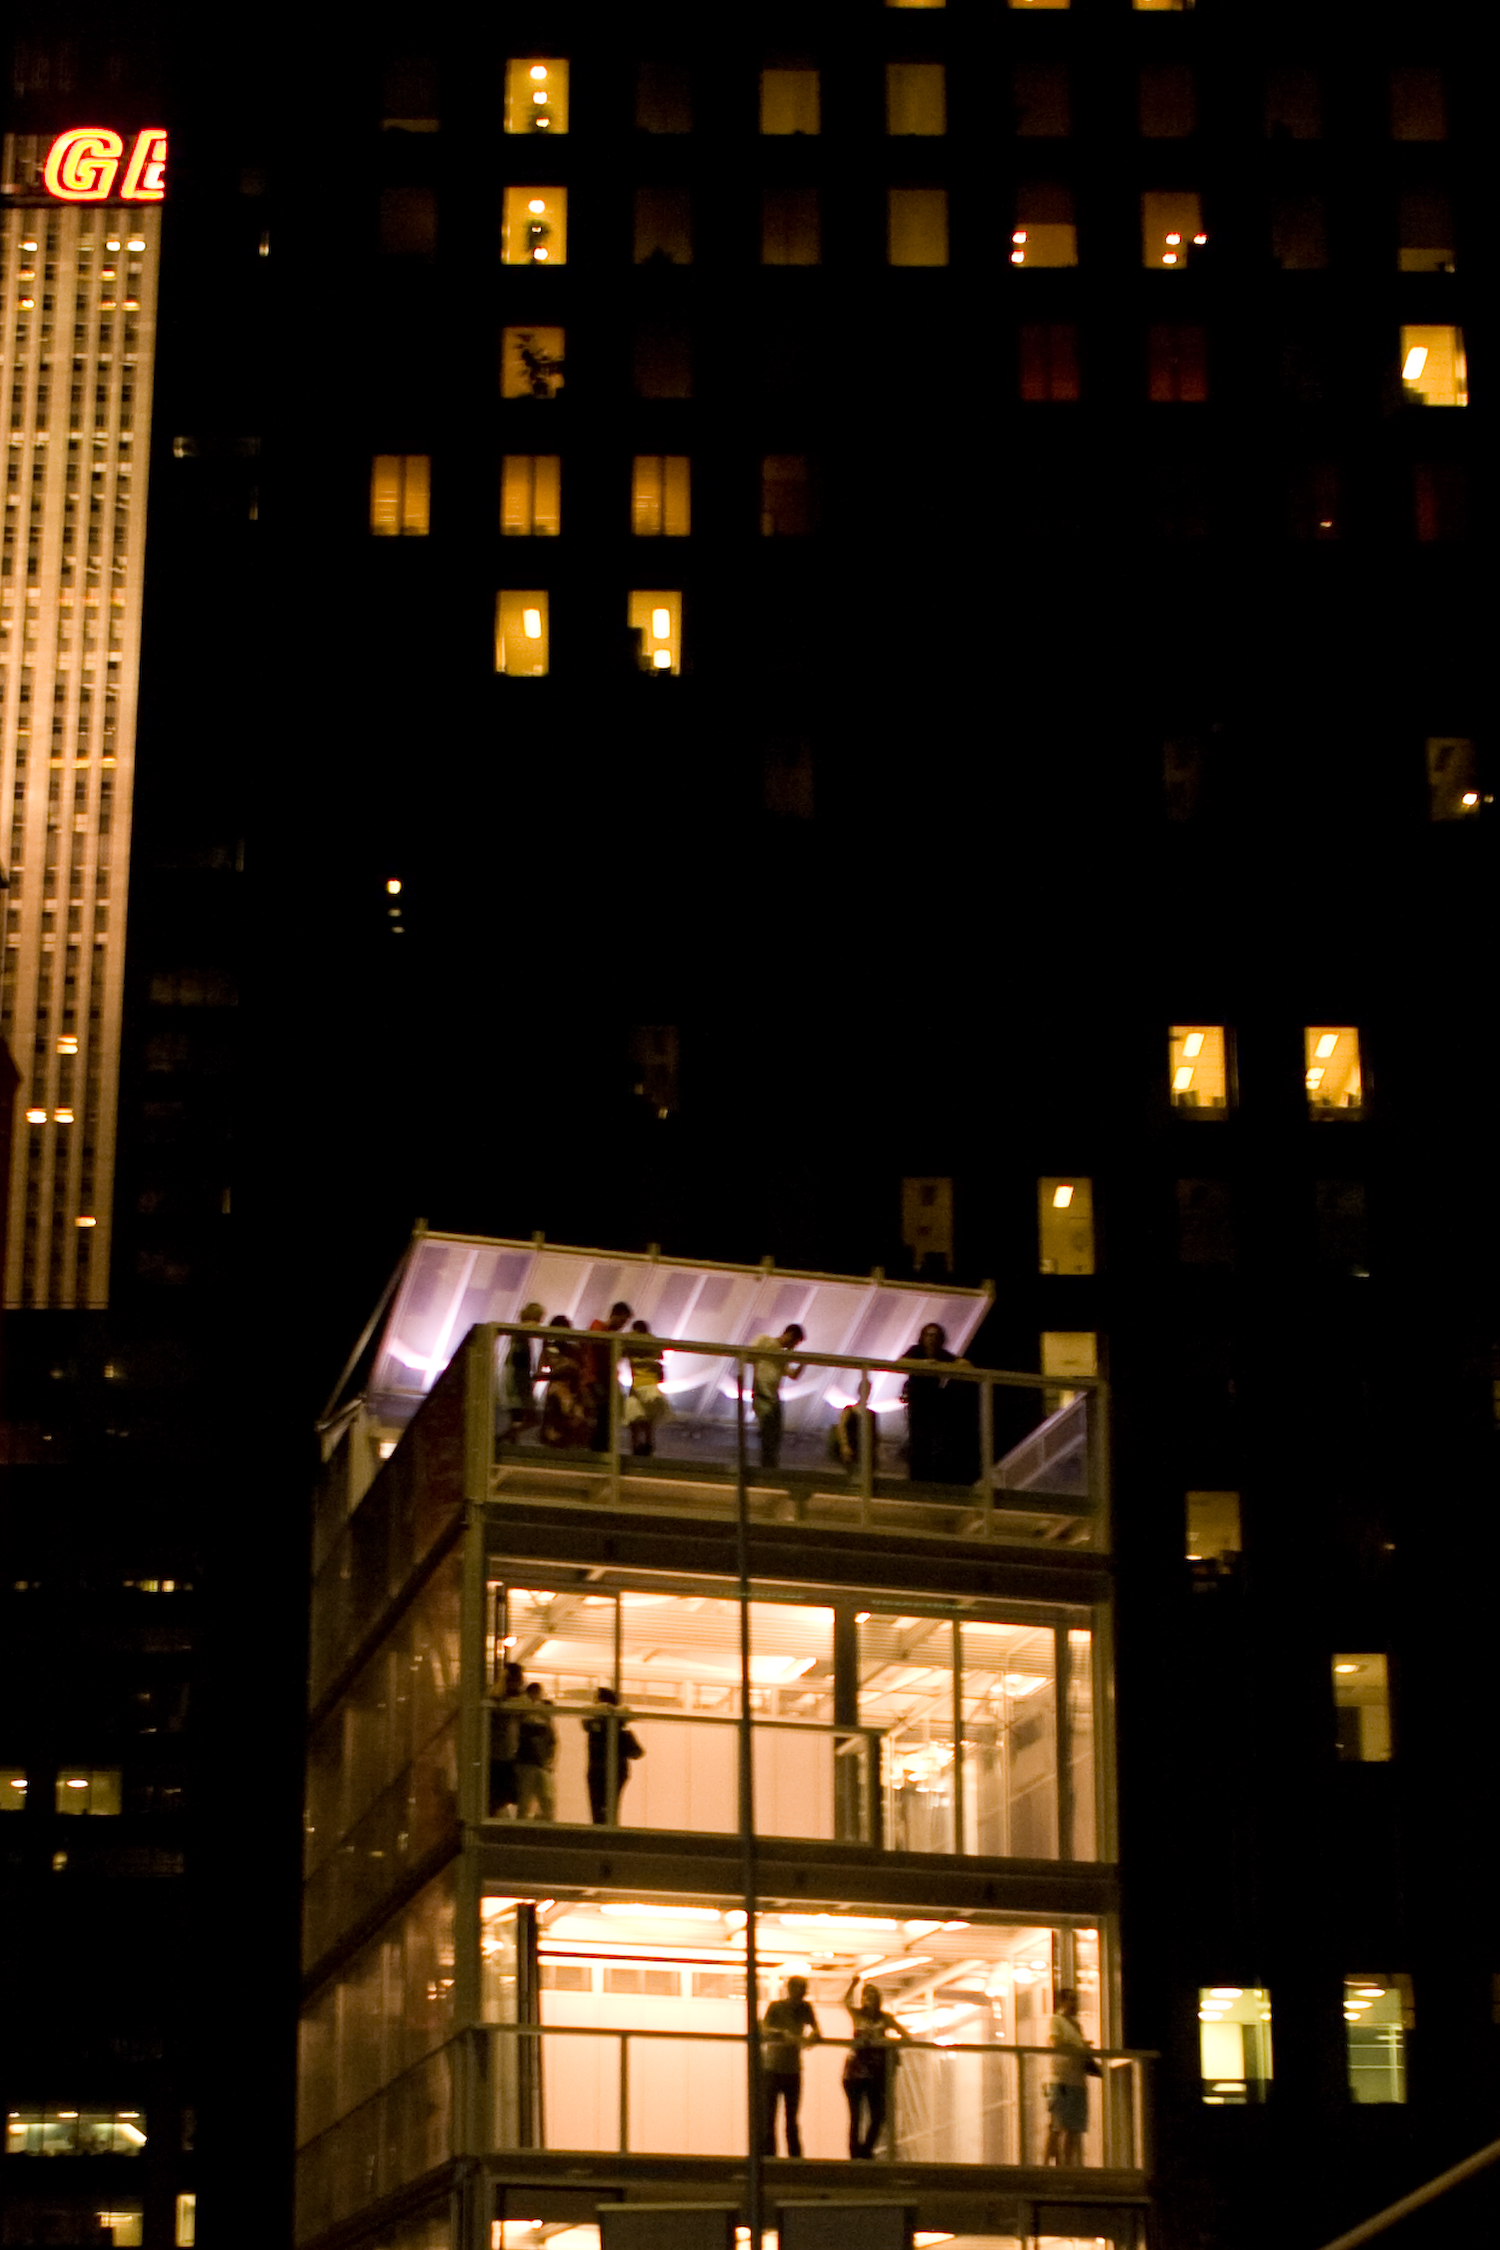 a night scene with a building that has lit up windows and people standing inside